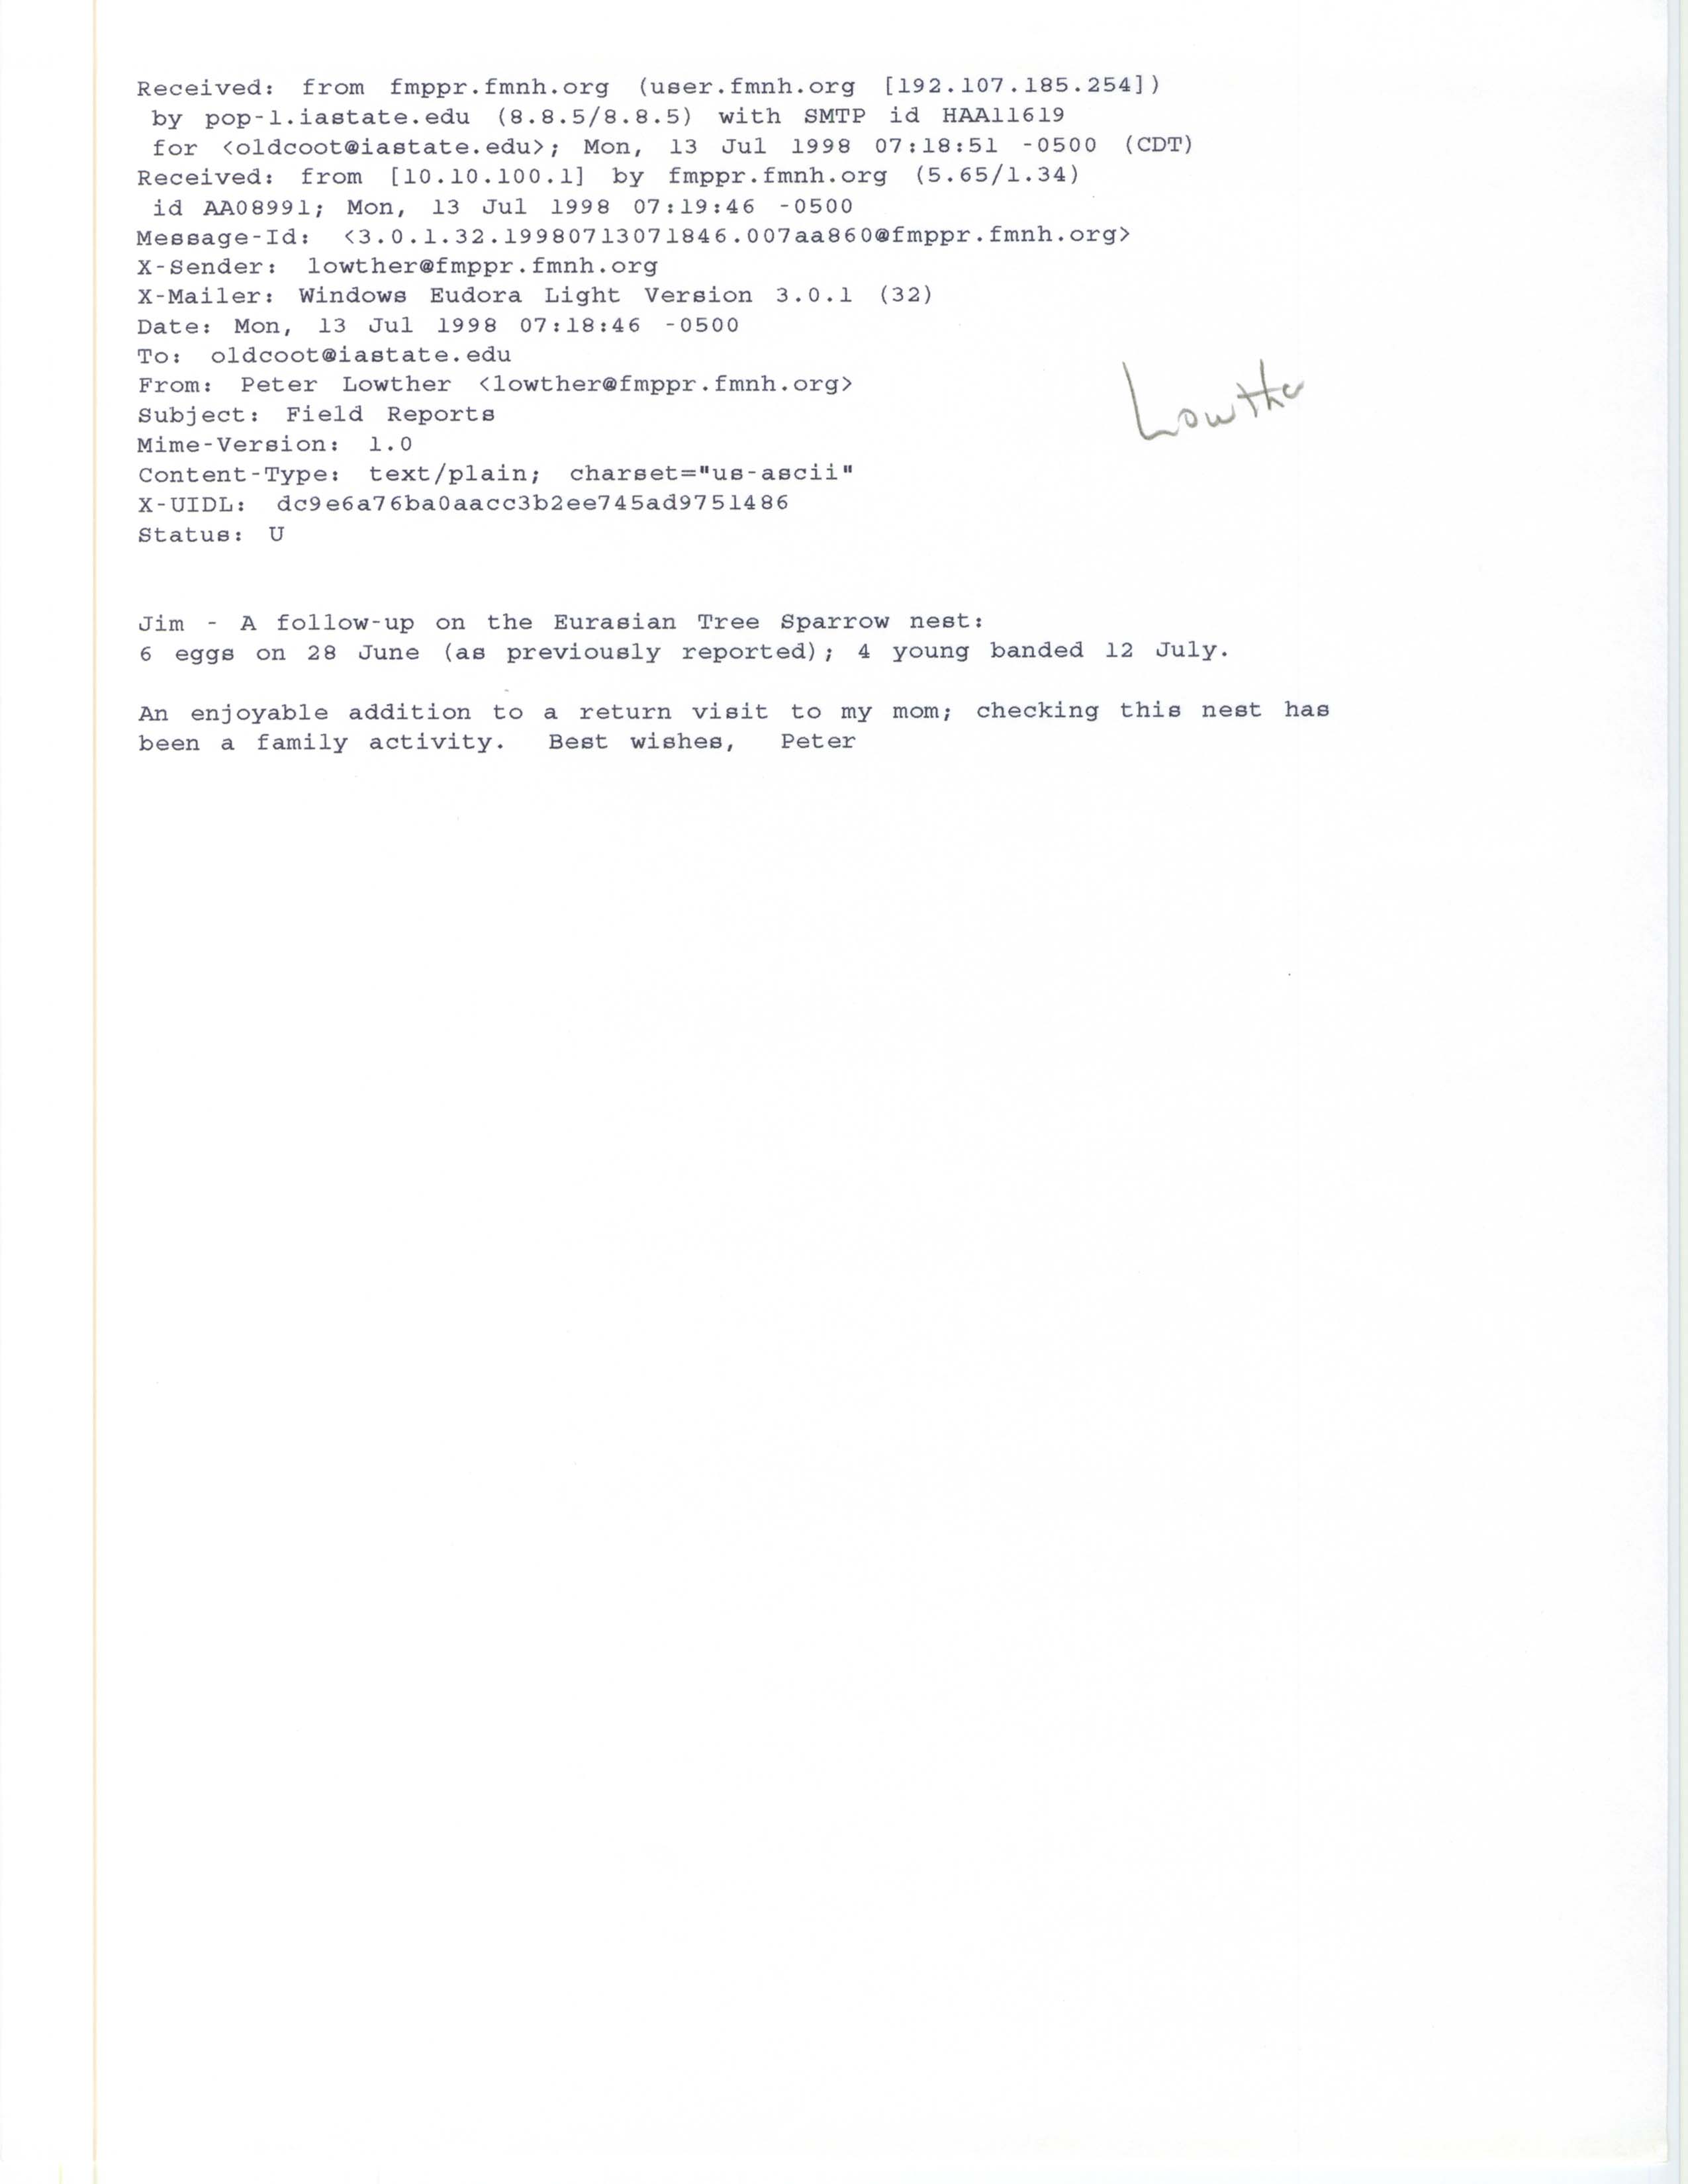 Peter Lowther email to Jim Dinsmore regarding Eurasian Tree Sparrow nest, July 13, 1998